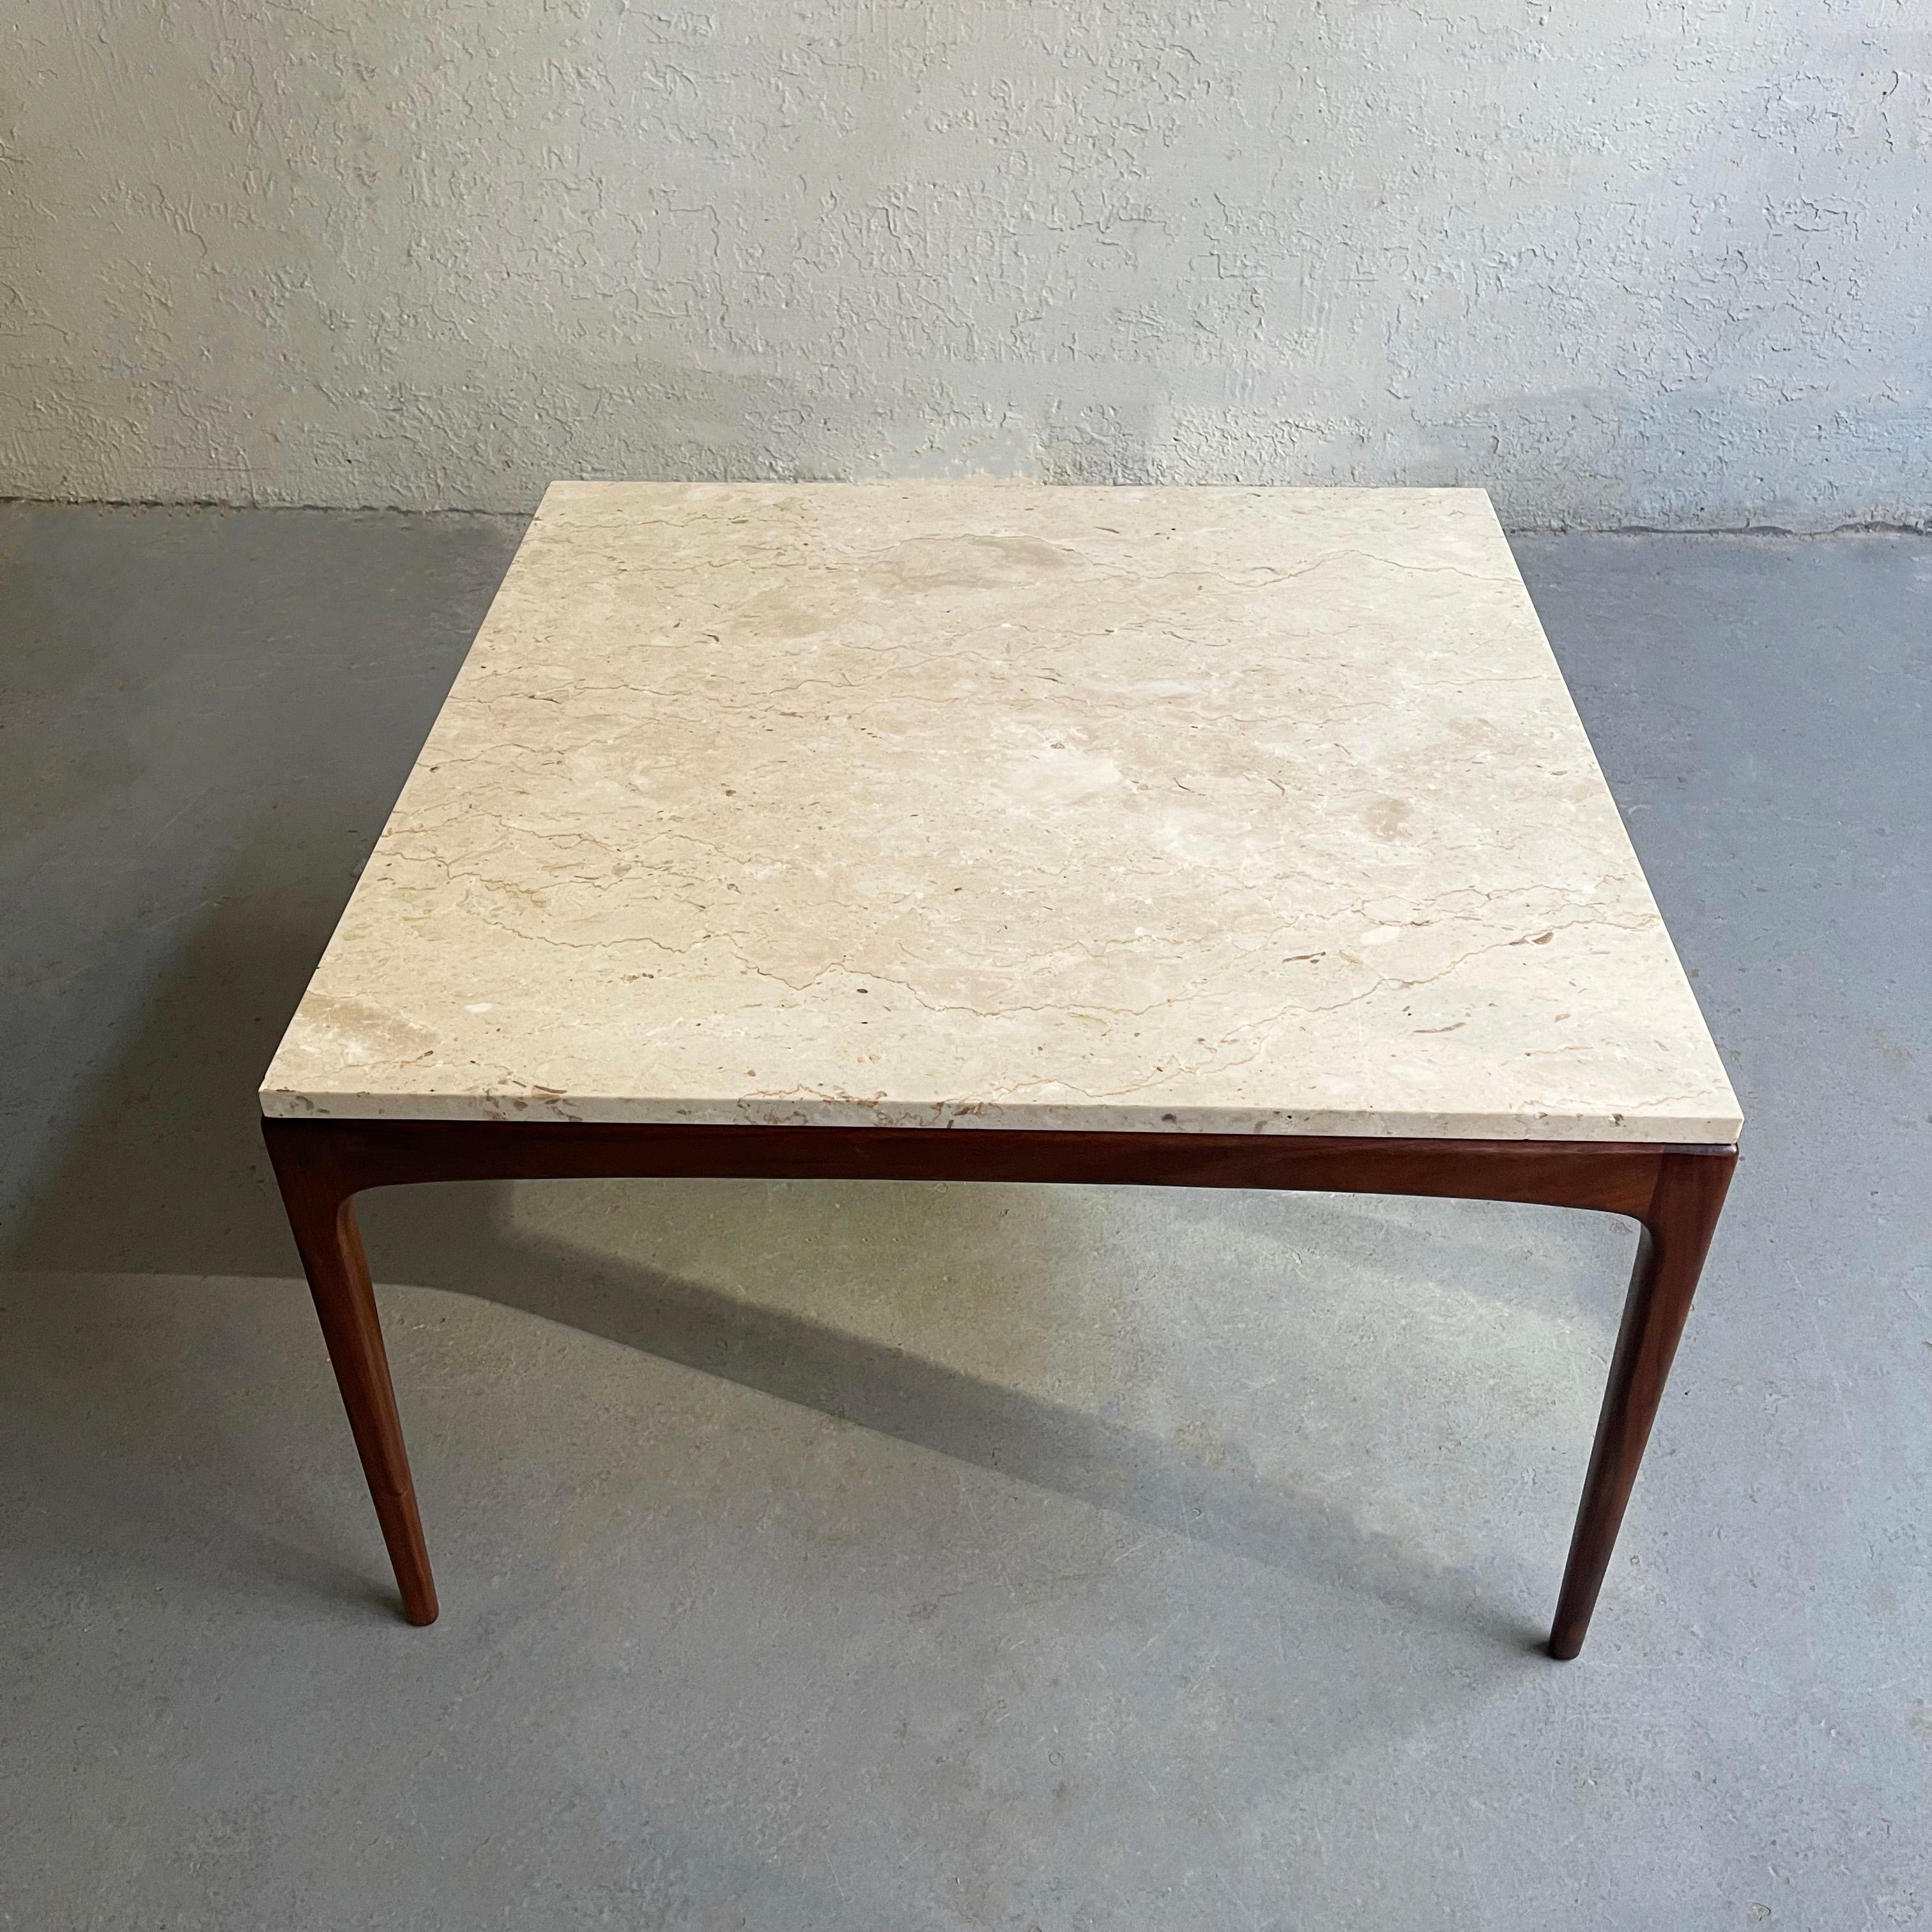 Scandinavian Modern Teak and Marble Coffee Table In Good Condition For Sale In Brooklyn, NY